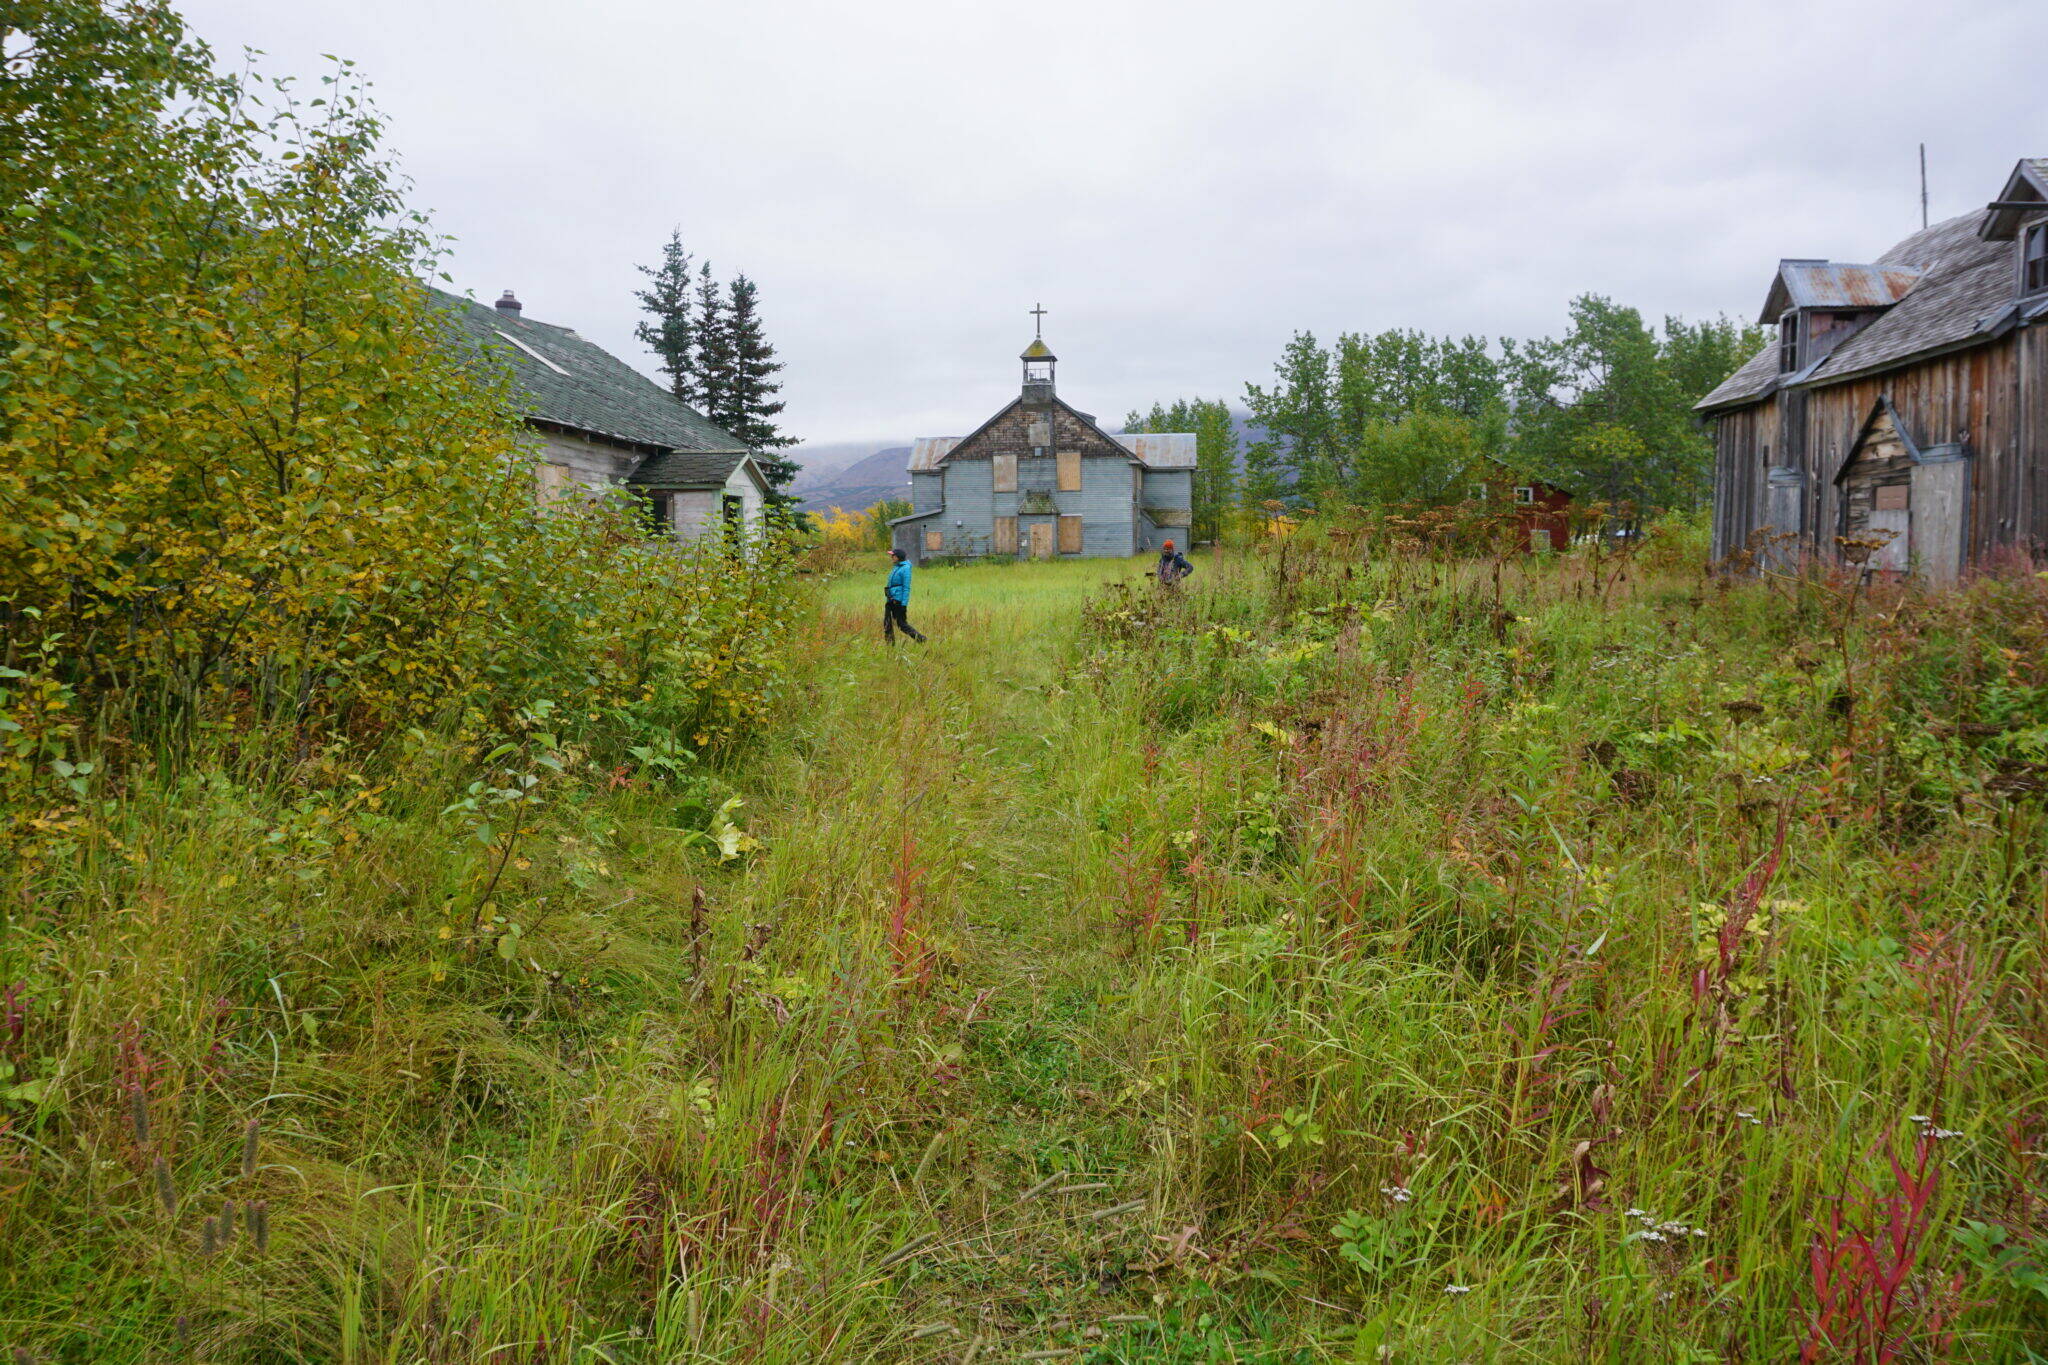 Visitors on Sept. 4, 2021, stroll by the historic chapel and buildings used for classrooms and dormitories that remain standing at Pilgrim Hot Springs. The site was used as an orphanage for Bering Strait-area children who lost their parents to the 1918-19 influenza epidemic. Pilgrim Hot Springs is among the state’s 11 most endangered historic properties, according to an annual list released by Preservation Alaska. (Yereth Rosen/Alaska Beacon)